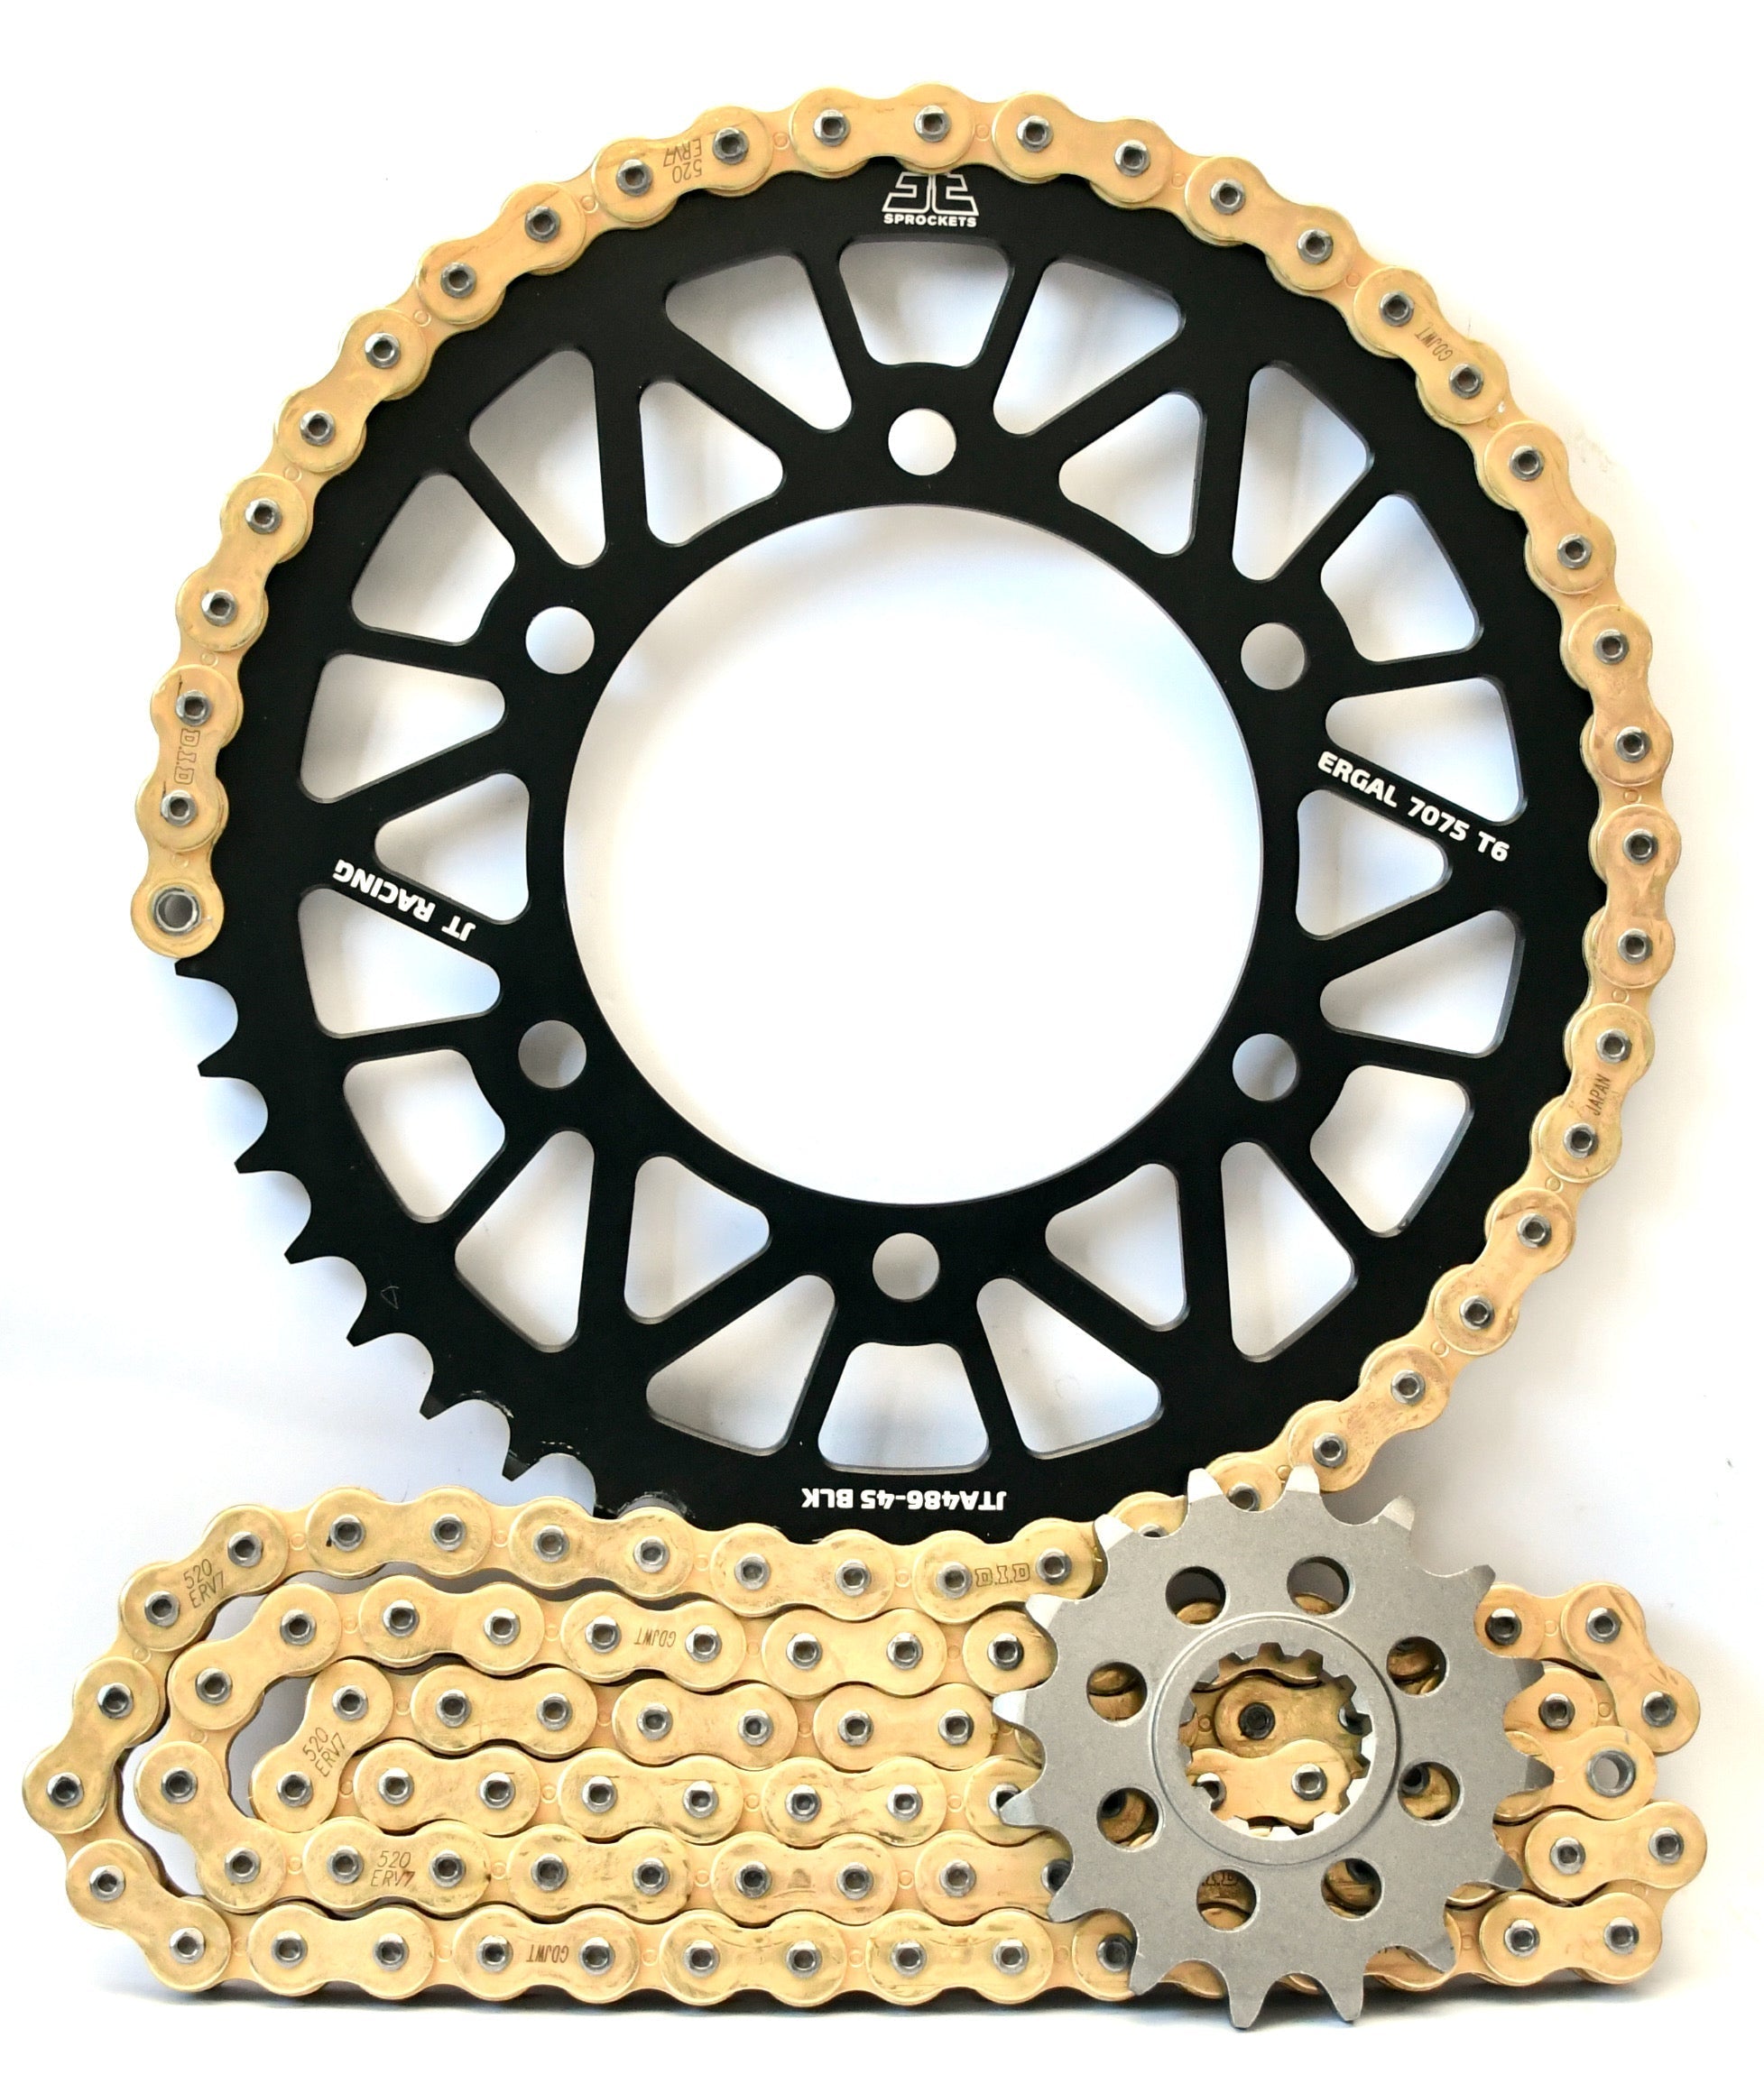 JT Racelite and DID 520 Conversion Chain & Sprocket Kit for BMW S1000RR 2012-2014 - Standard Gearing